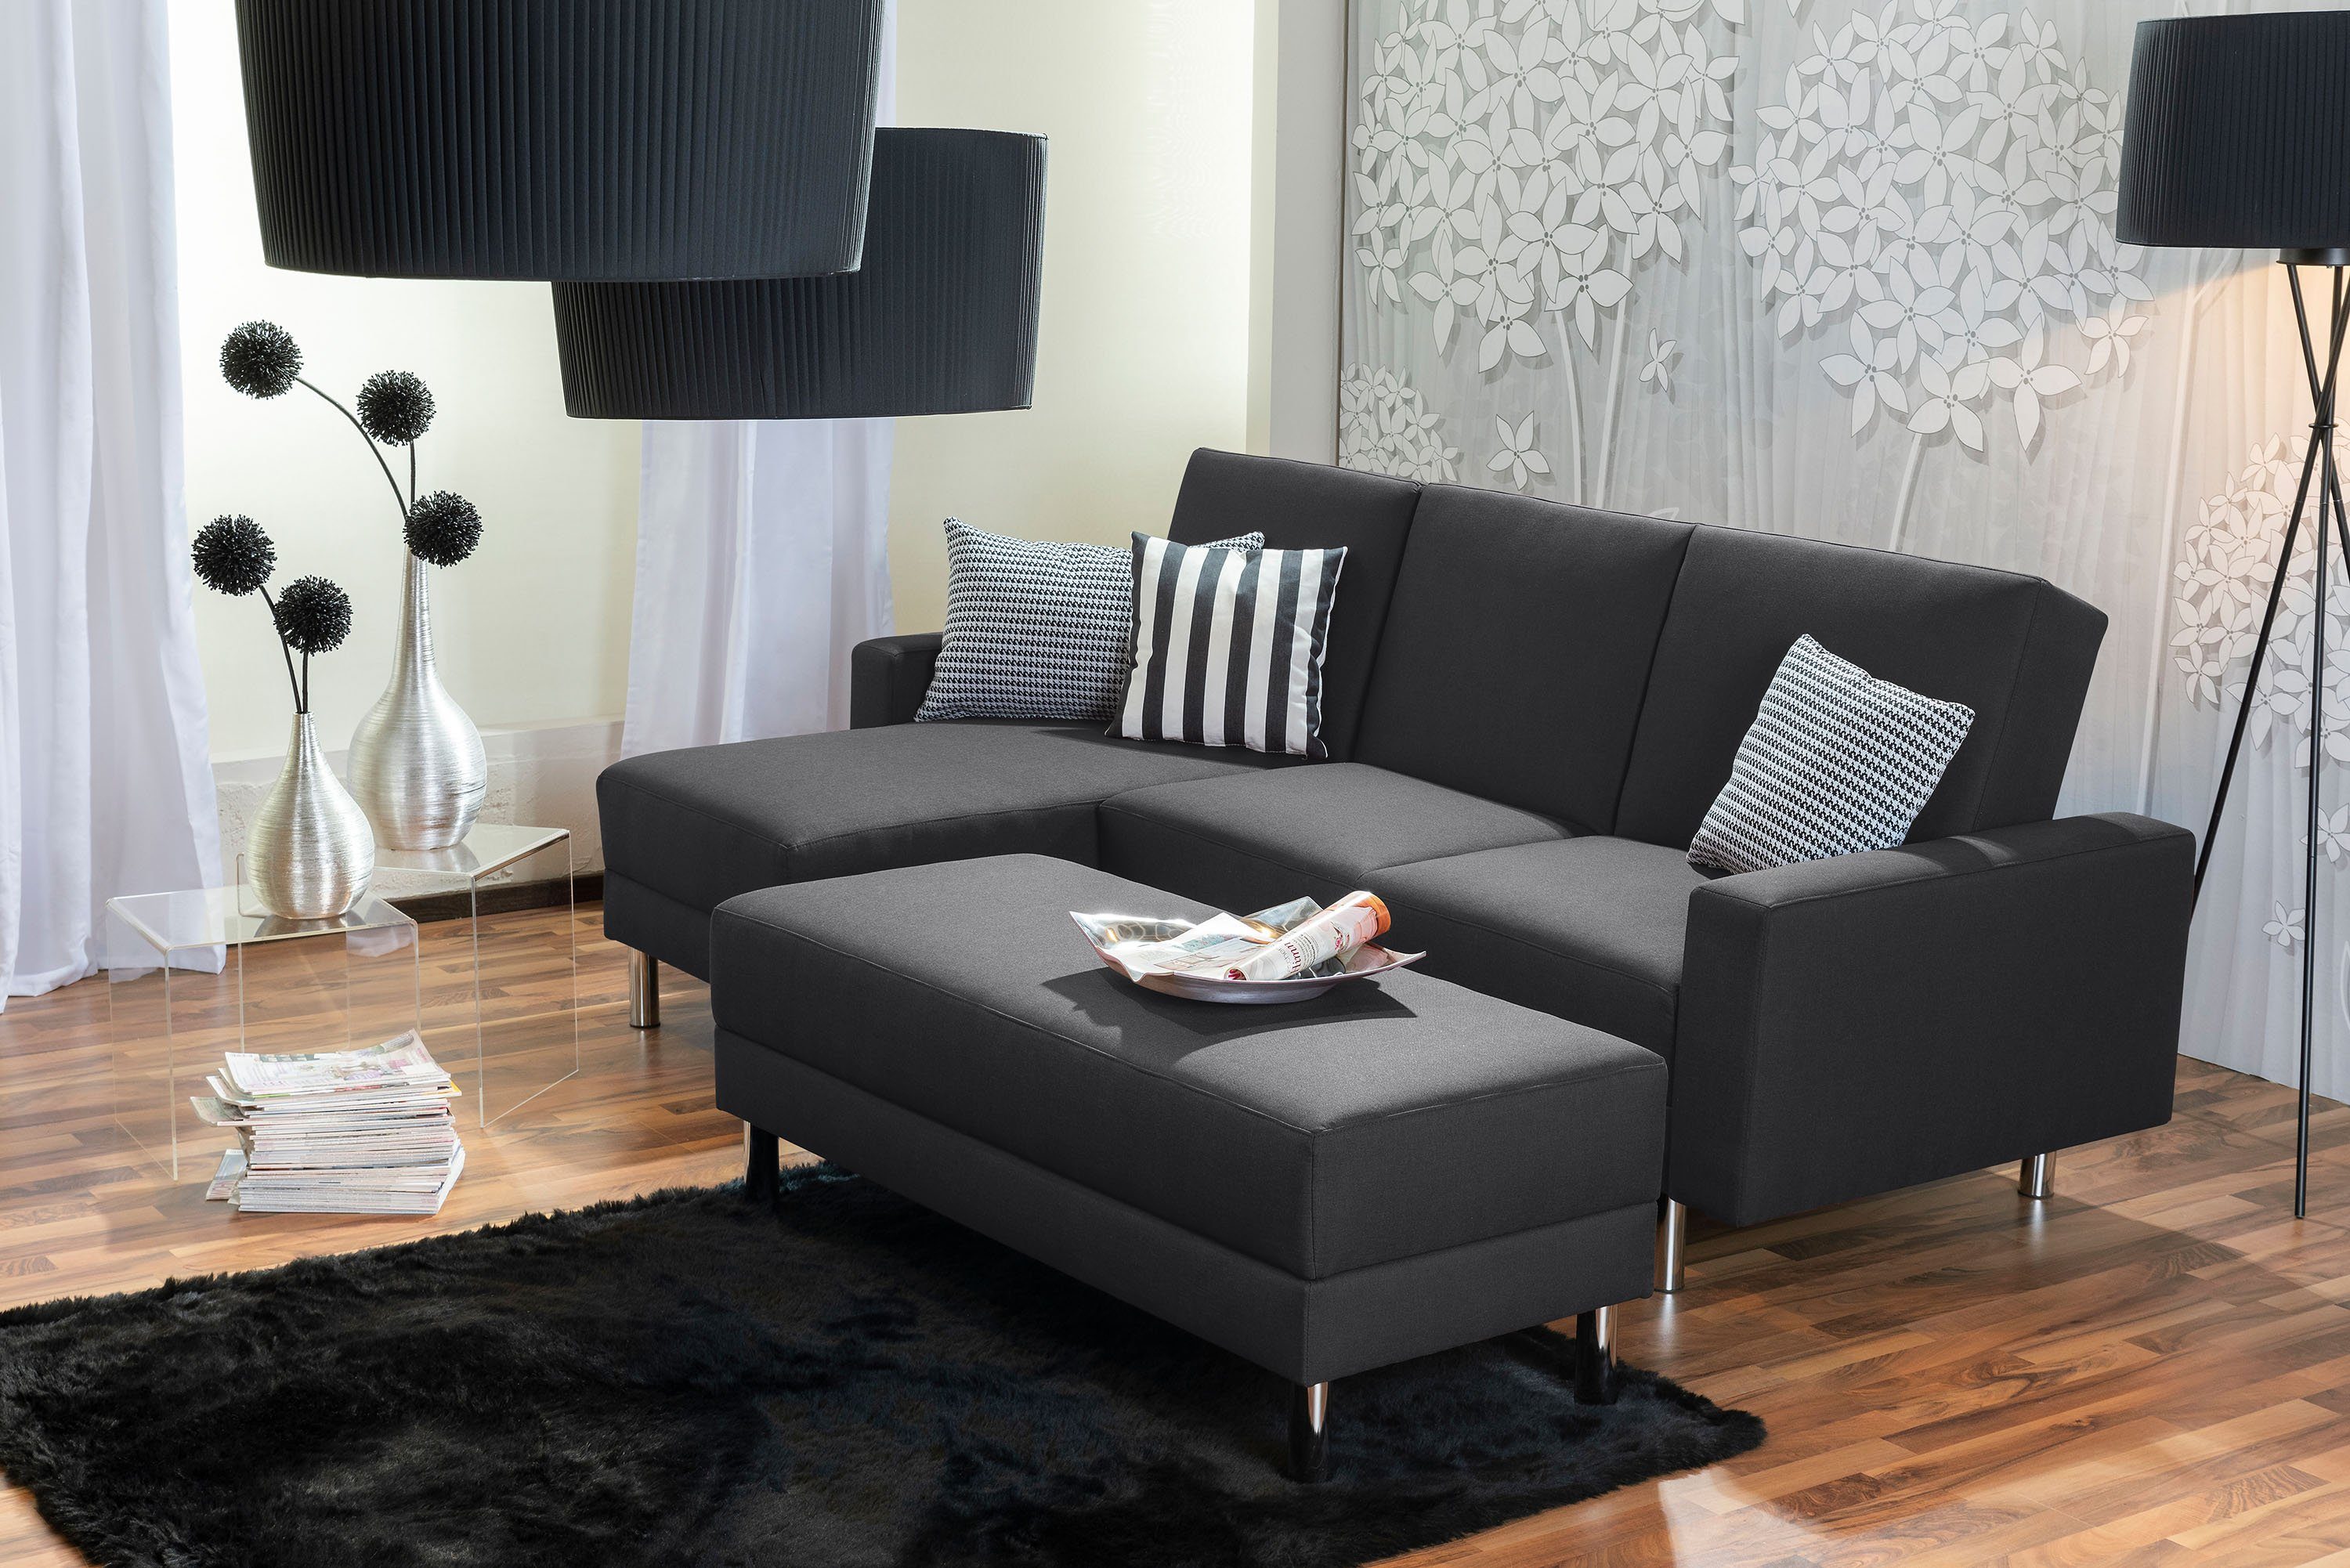 Max Winzer® Loungesofa Just Fashion Funktionssofa Flachgewebe graphit, 1 Stück, Made in Germany